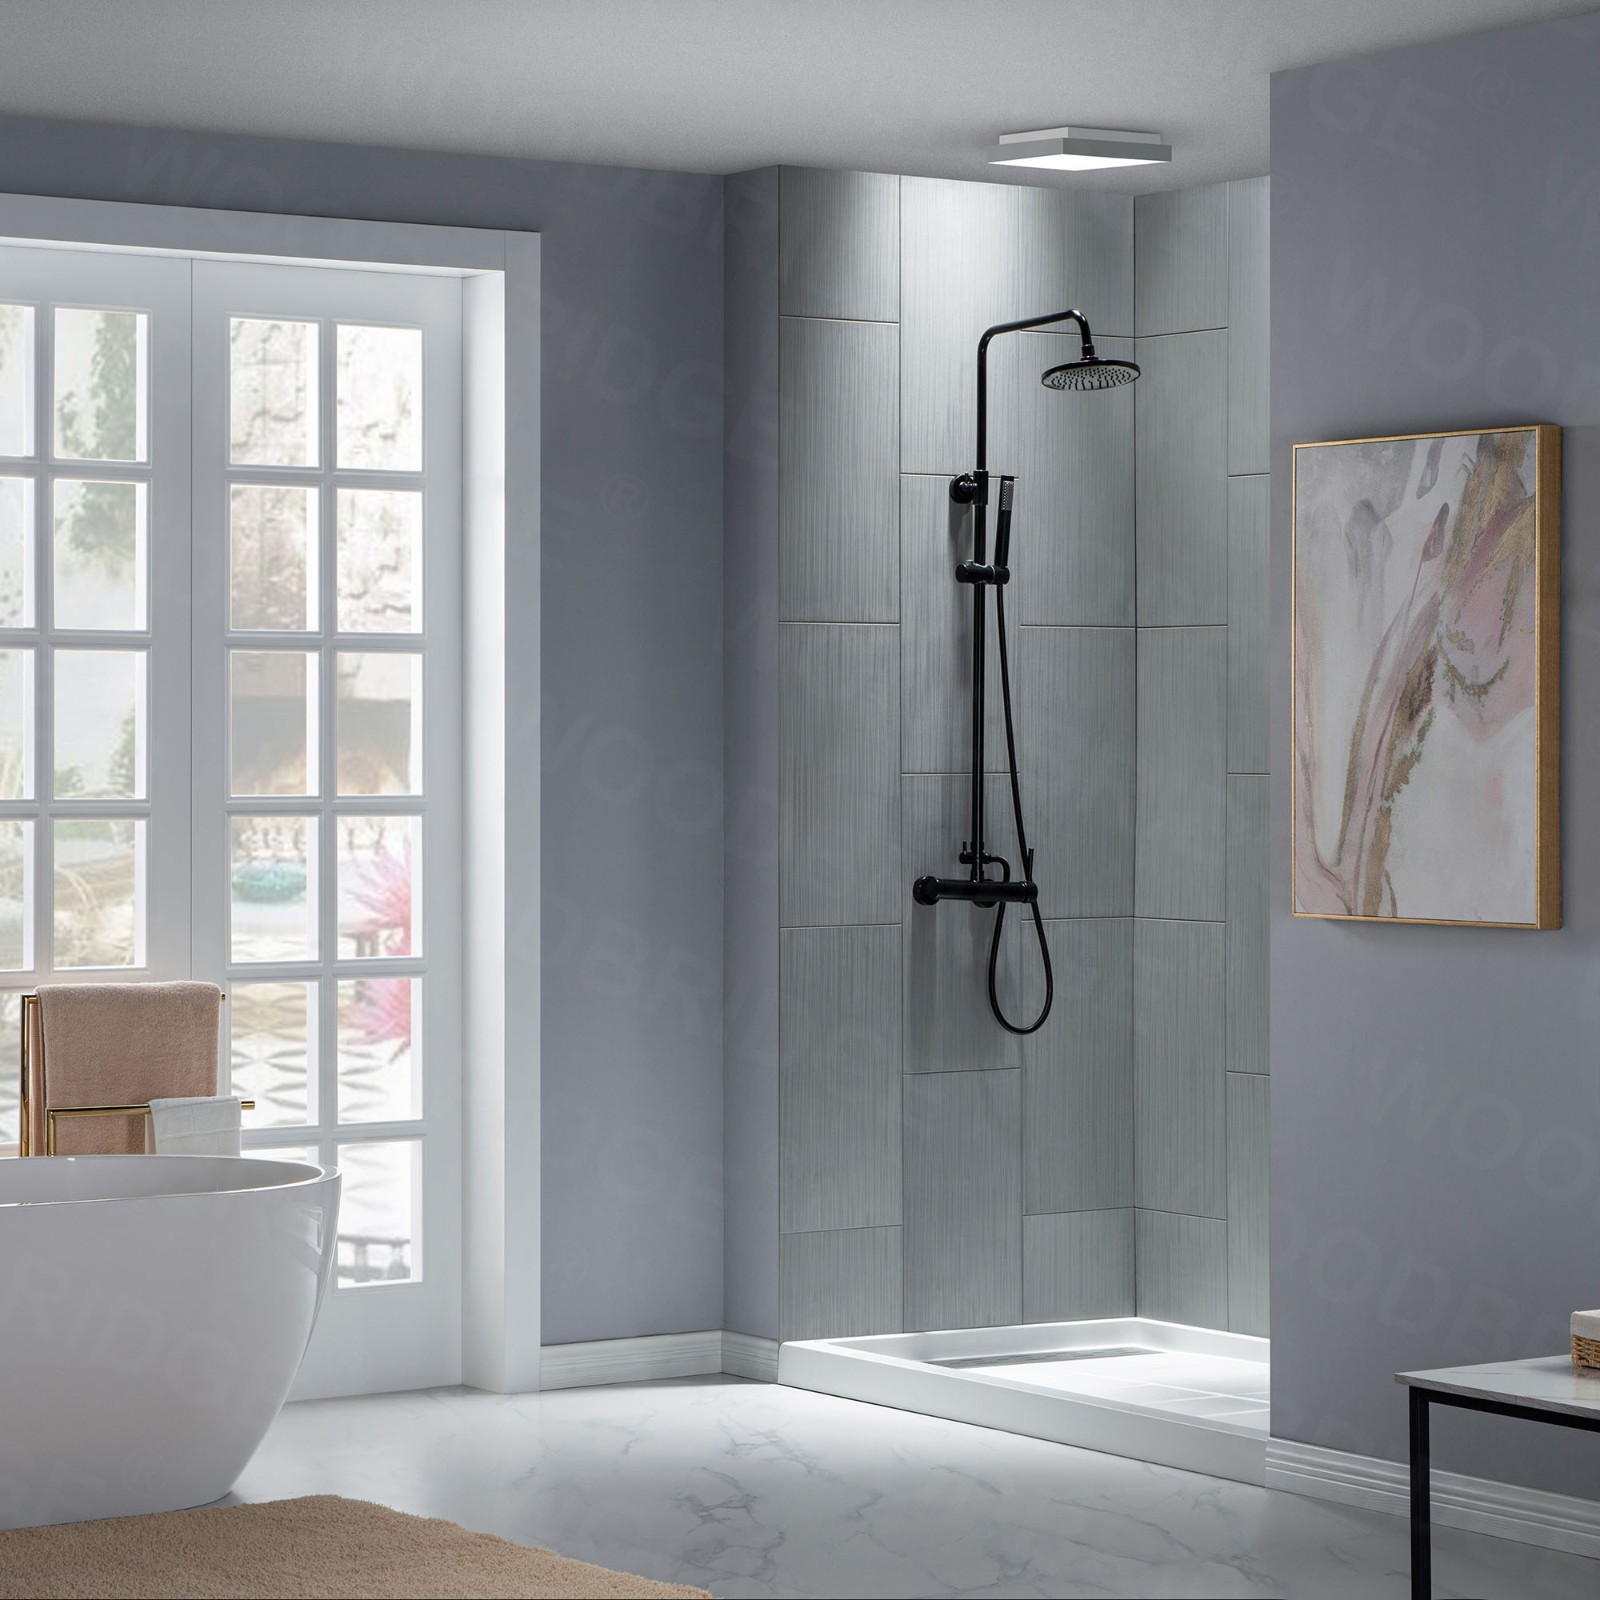  WOODBRIDGE Solid Surface 3-Panel Shower Wall Kit, 36-in L x 60-in W x 96-in H, Stacked Block in a Staggered Vertical Pattern. Matte Grey Finish_5274